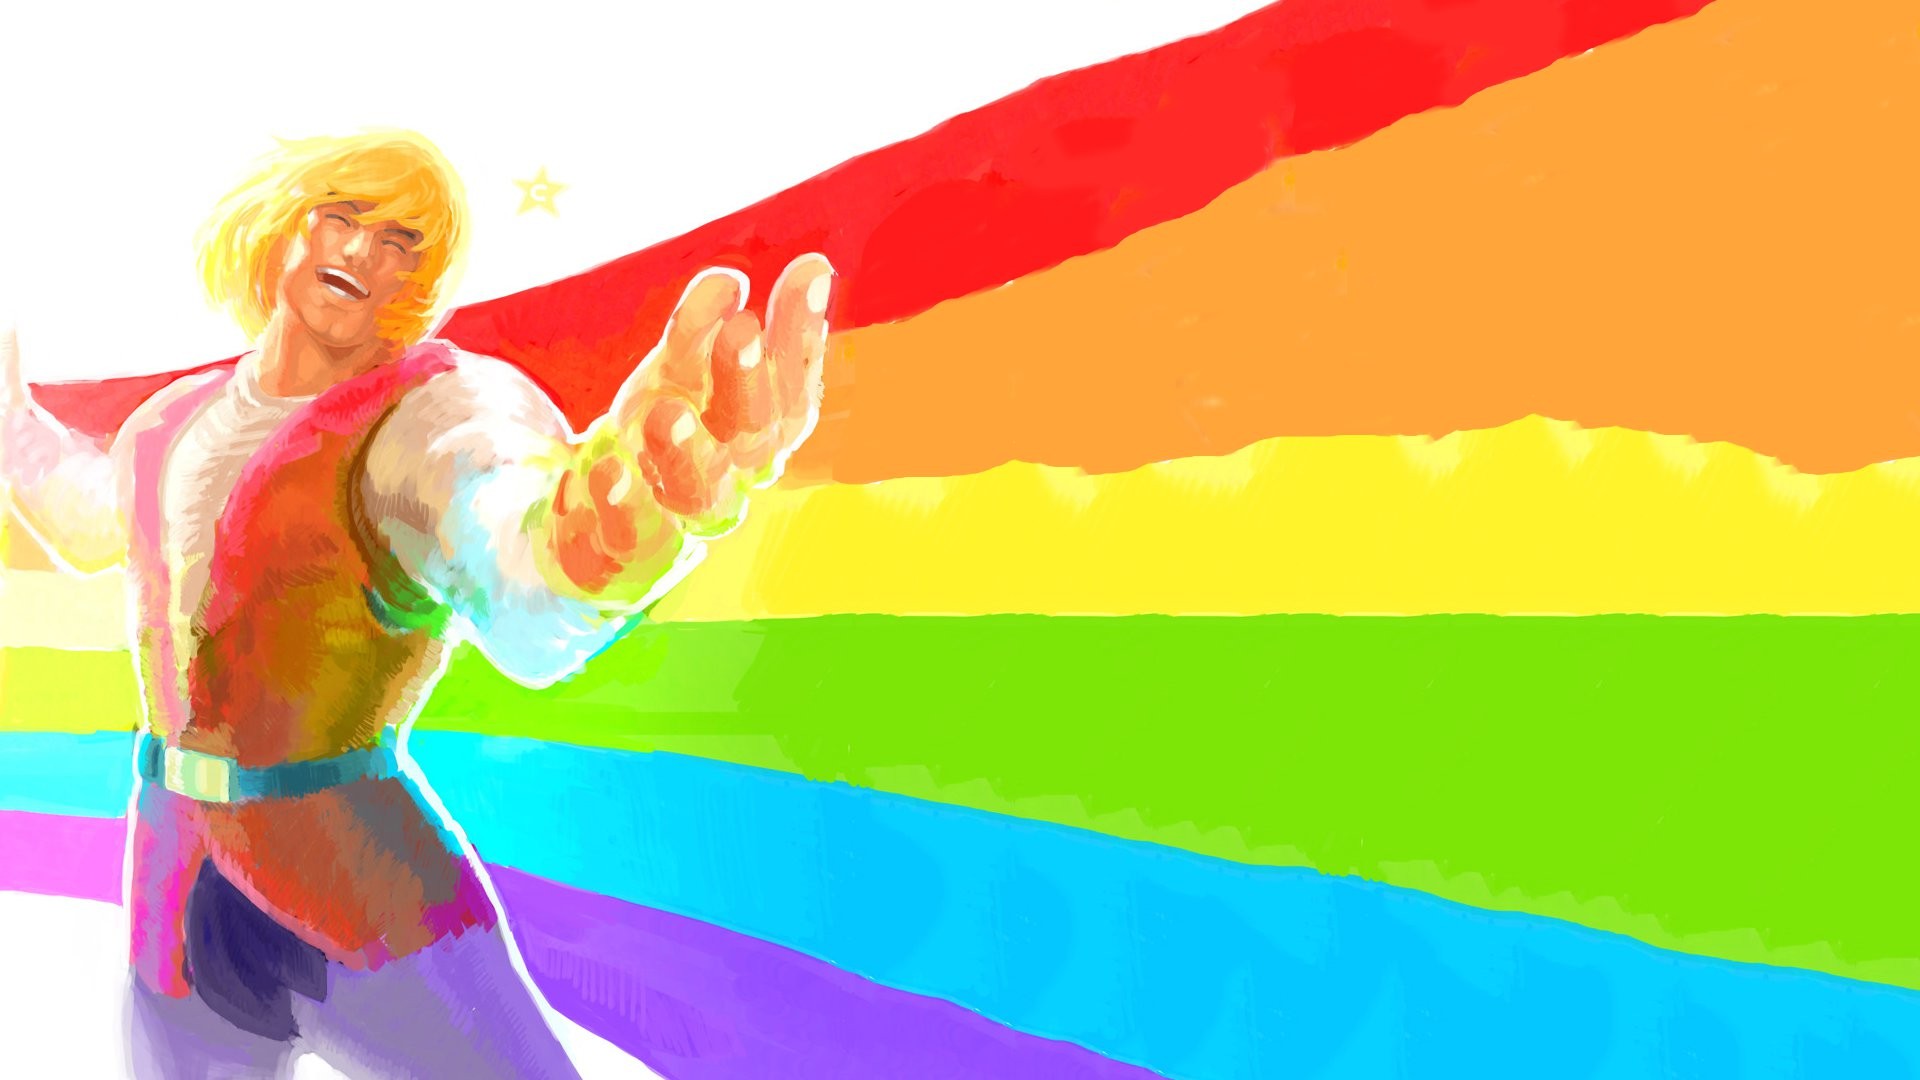 He Man Rainbows He Man And The Masters Of The Universe 1920x1080